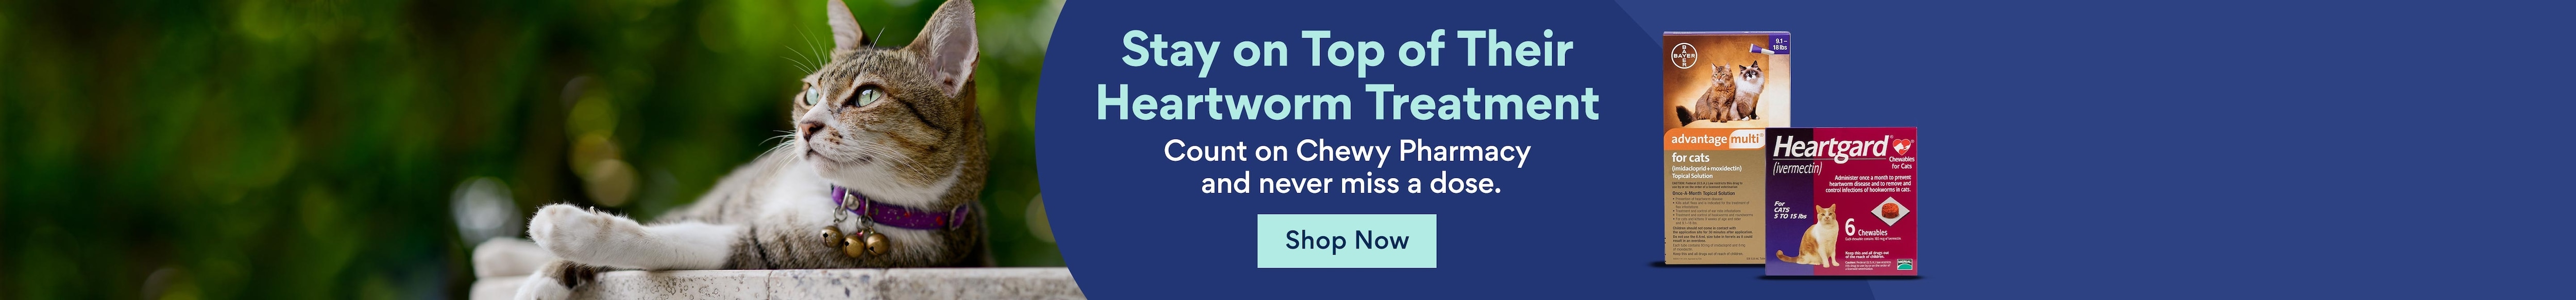 Stay on top of their heartworm treatment. Count on Chewy Pharmacy and never miss a dose.